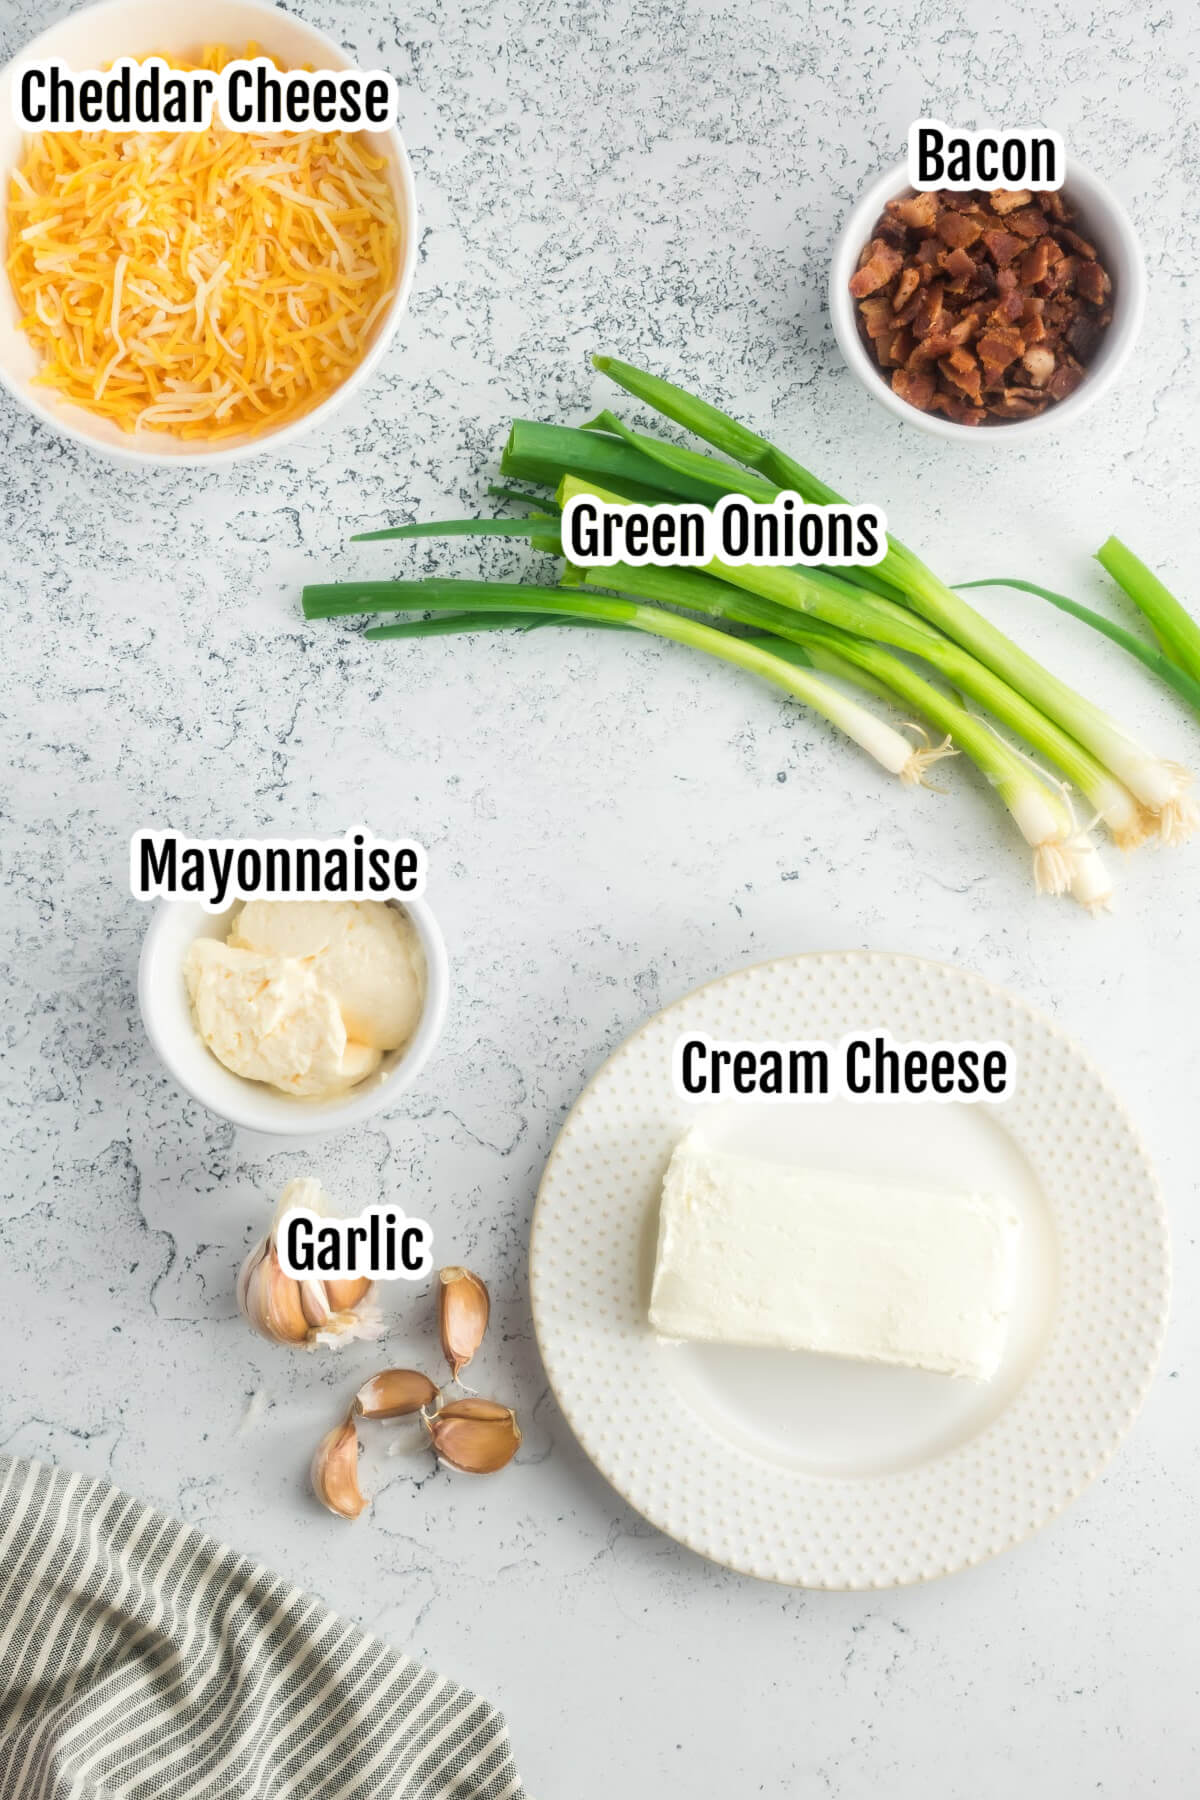 Ingredients for the Neiman Marcus Million Dollar Cream Cheese Dip.